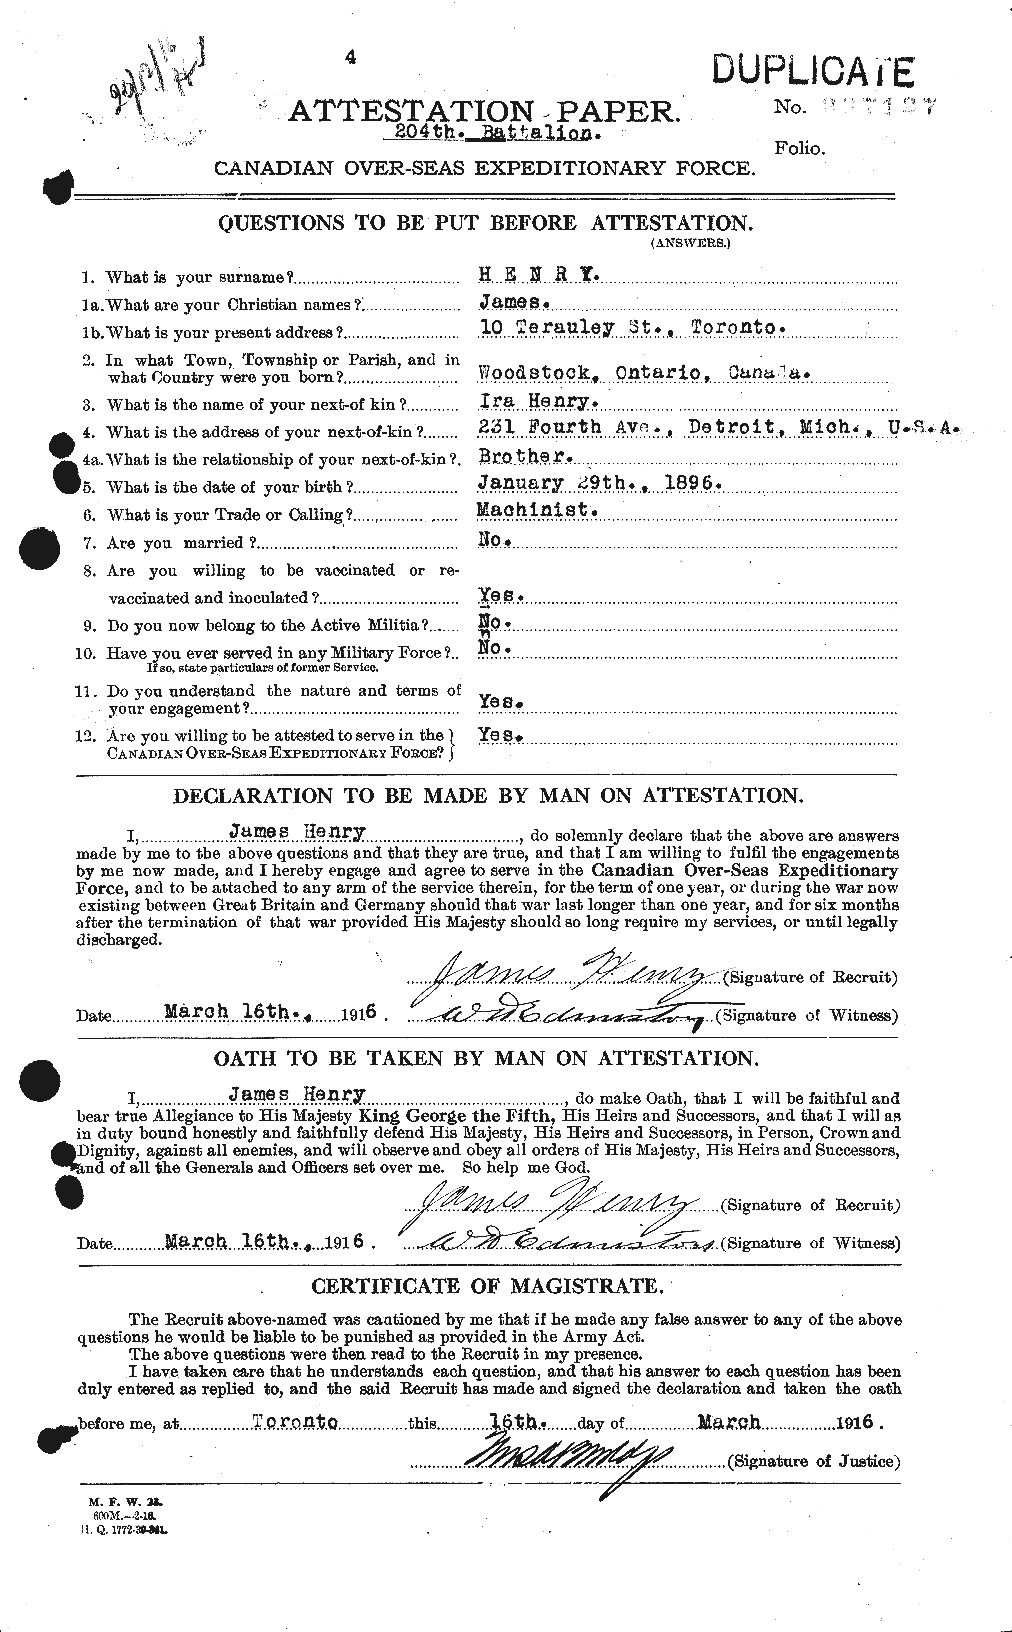 Personnel Records of the First World War - CEF 387588a